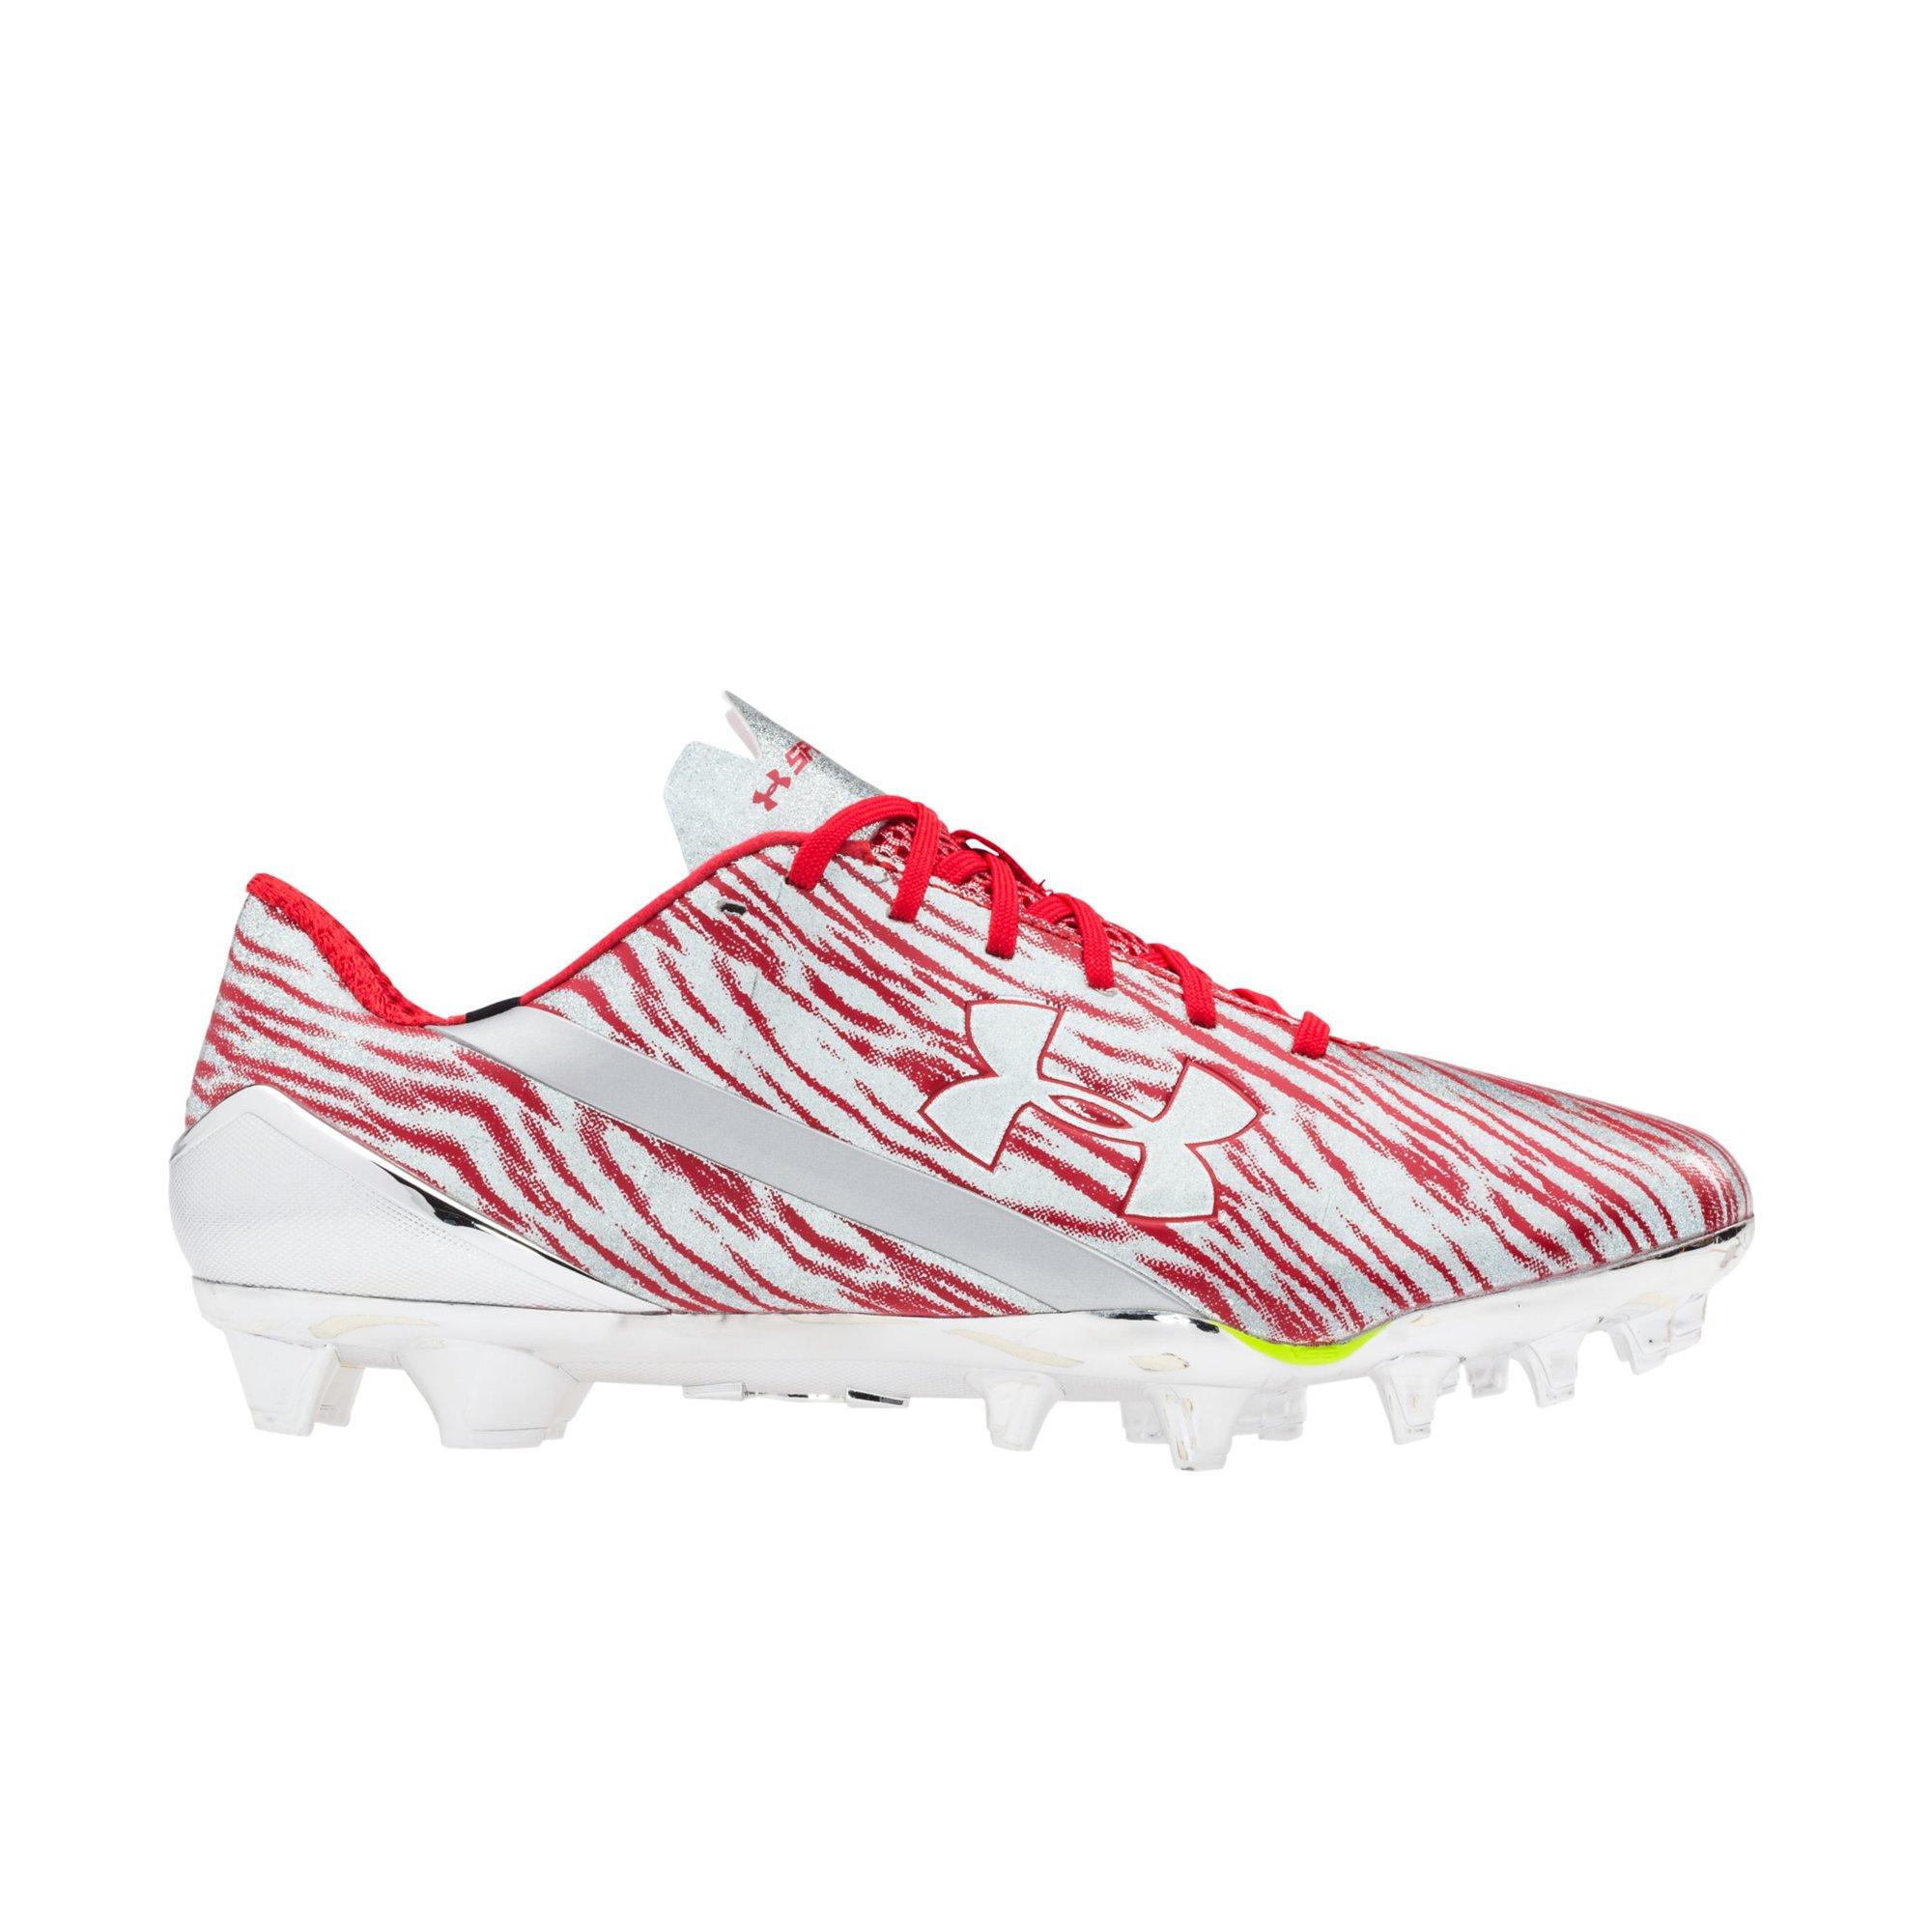 red and black under armour football cleats